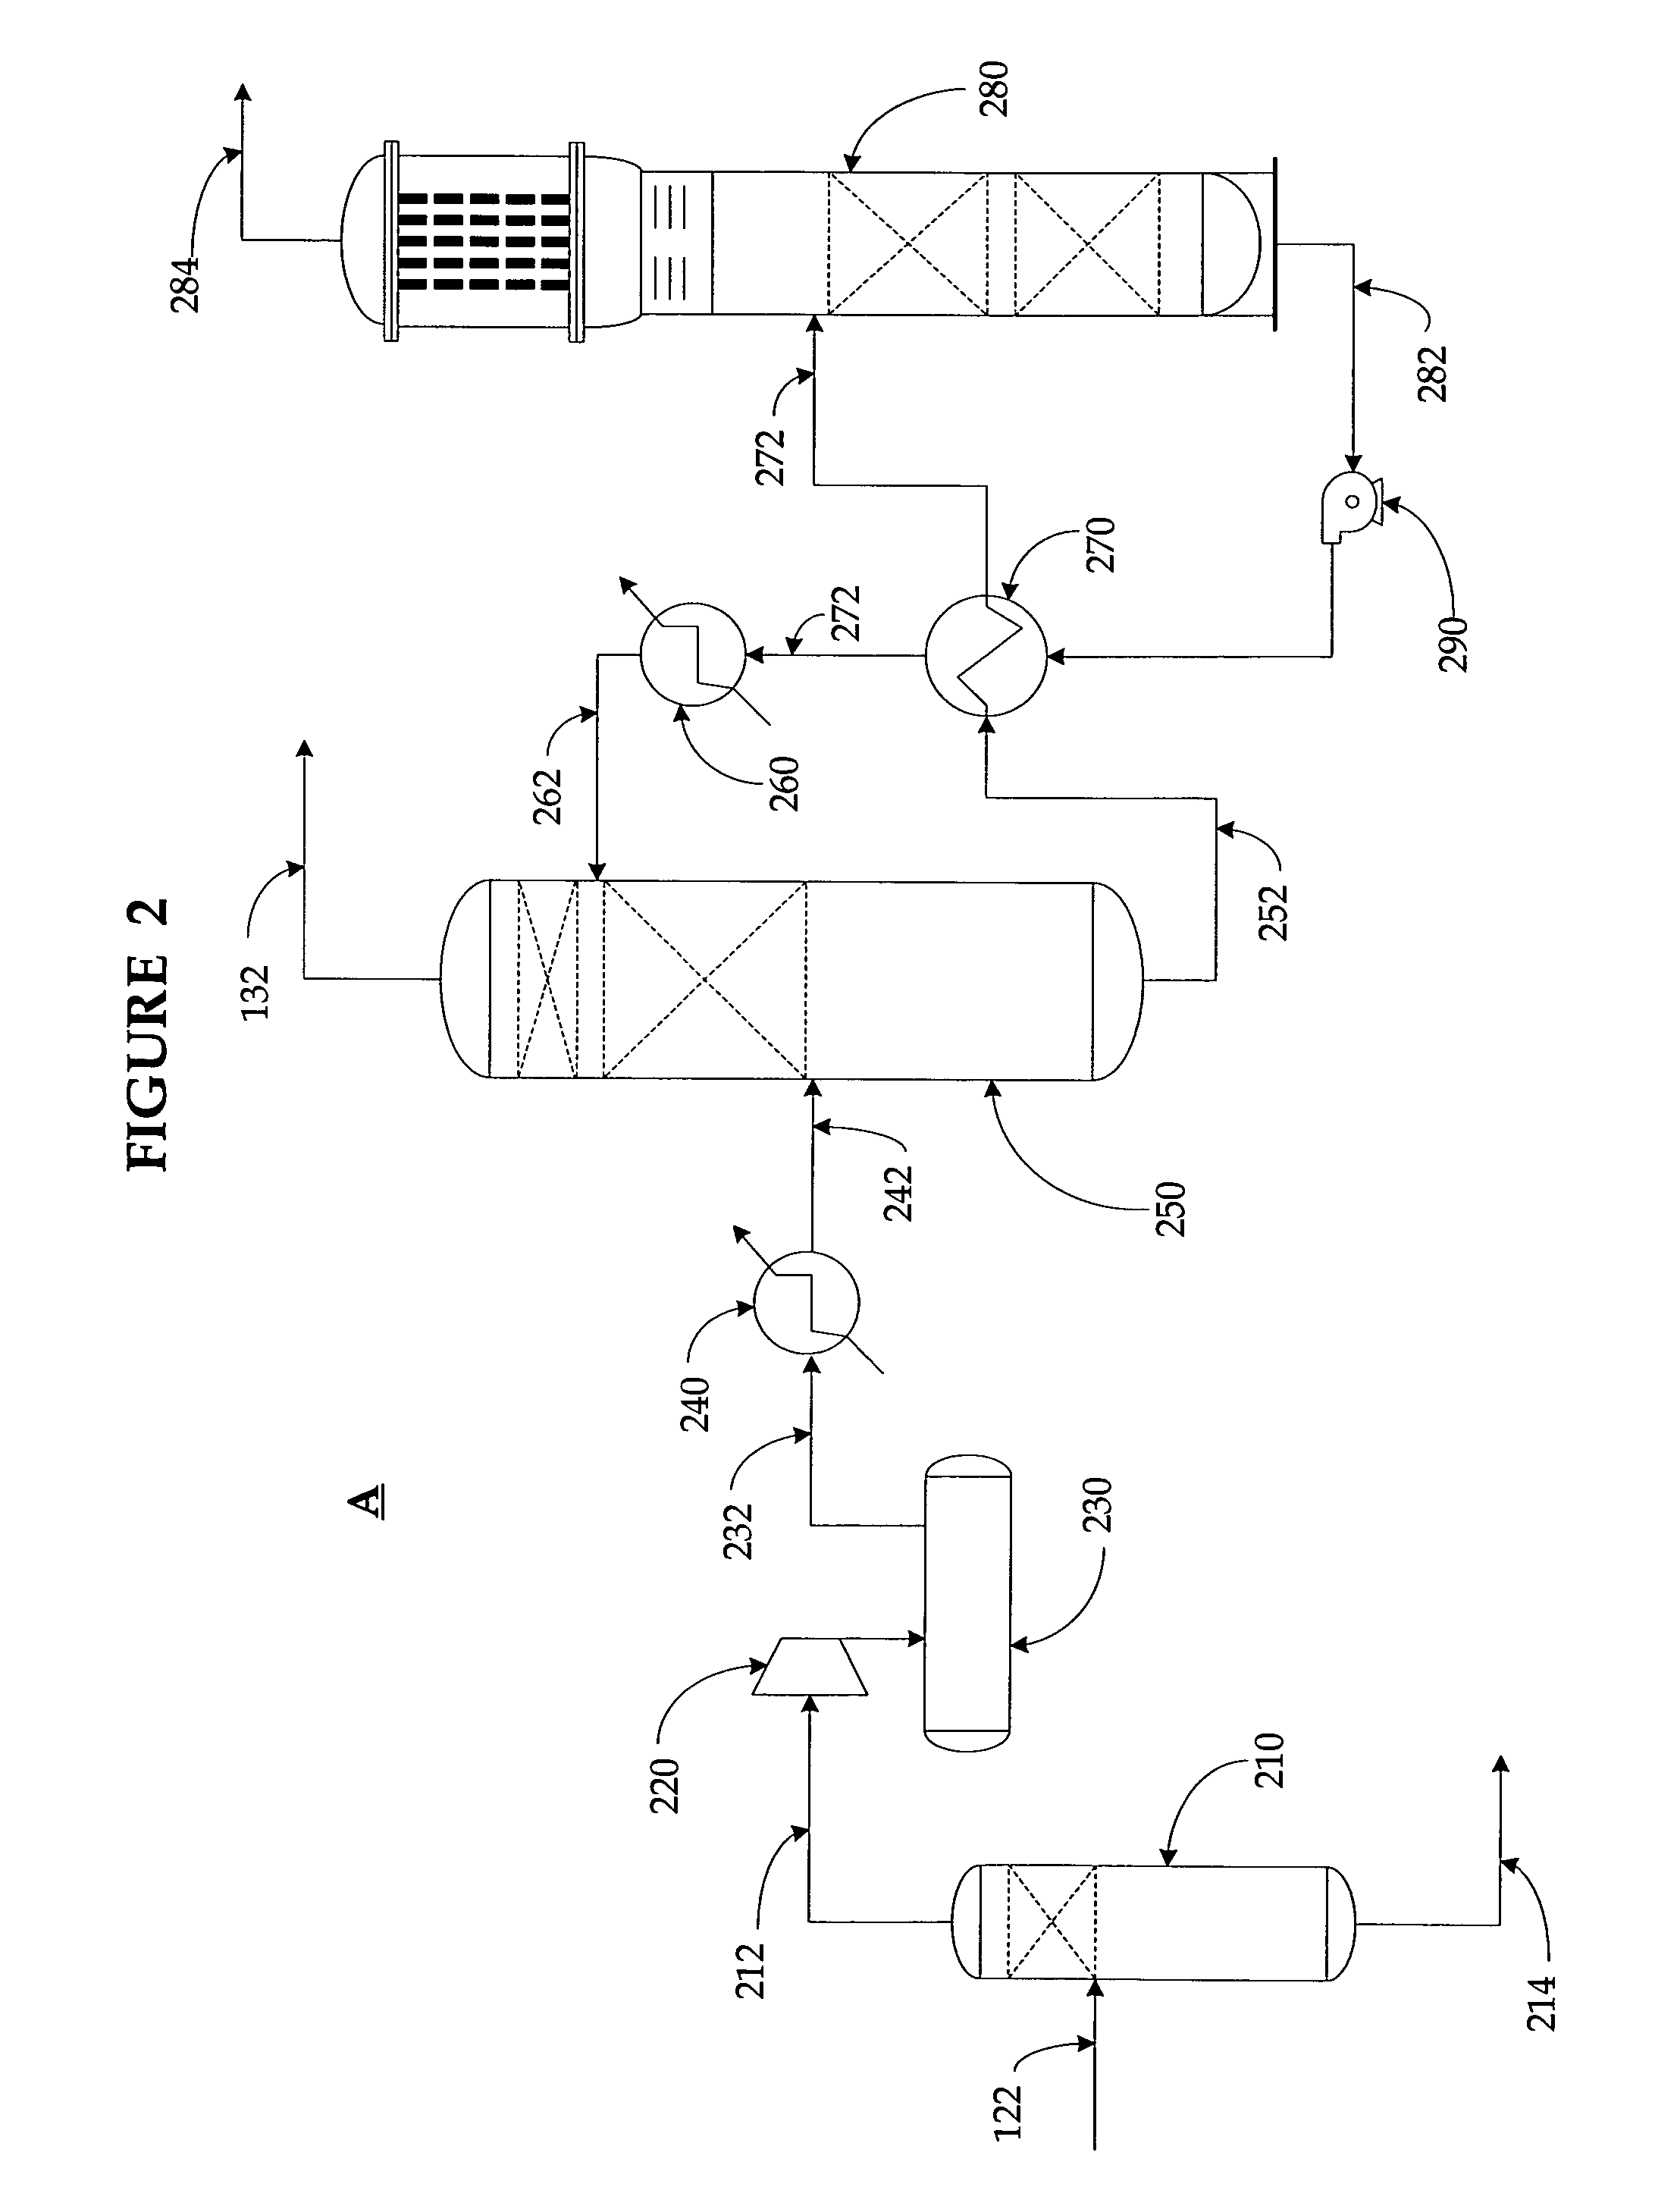 System and method for extracting energy from agricultural waste